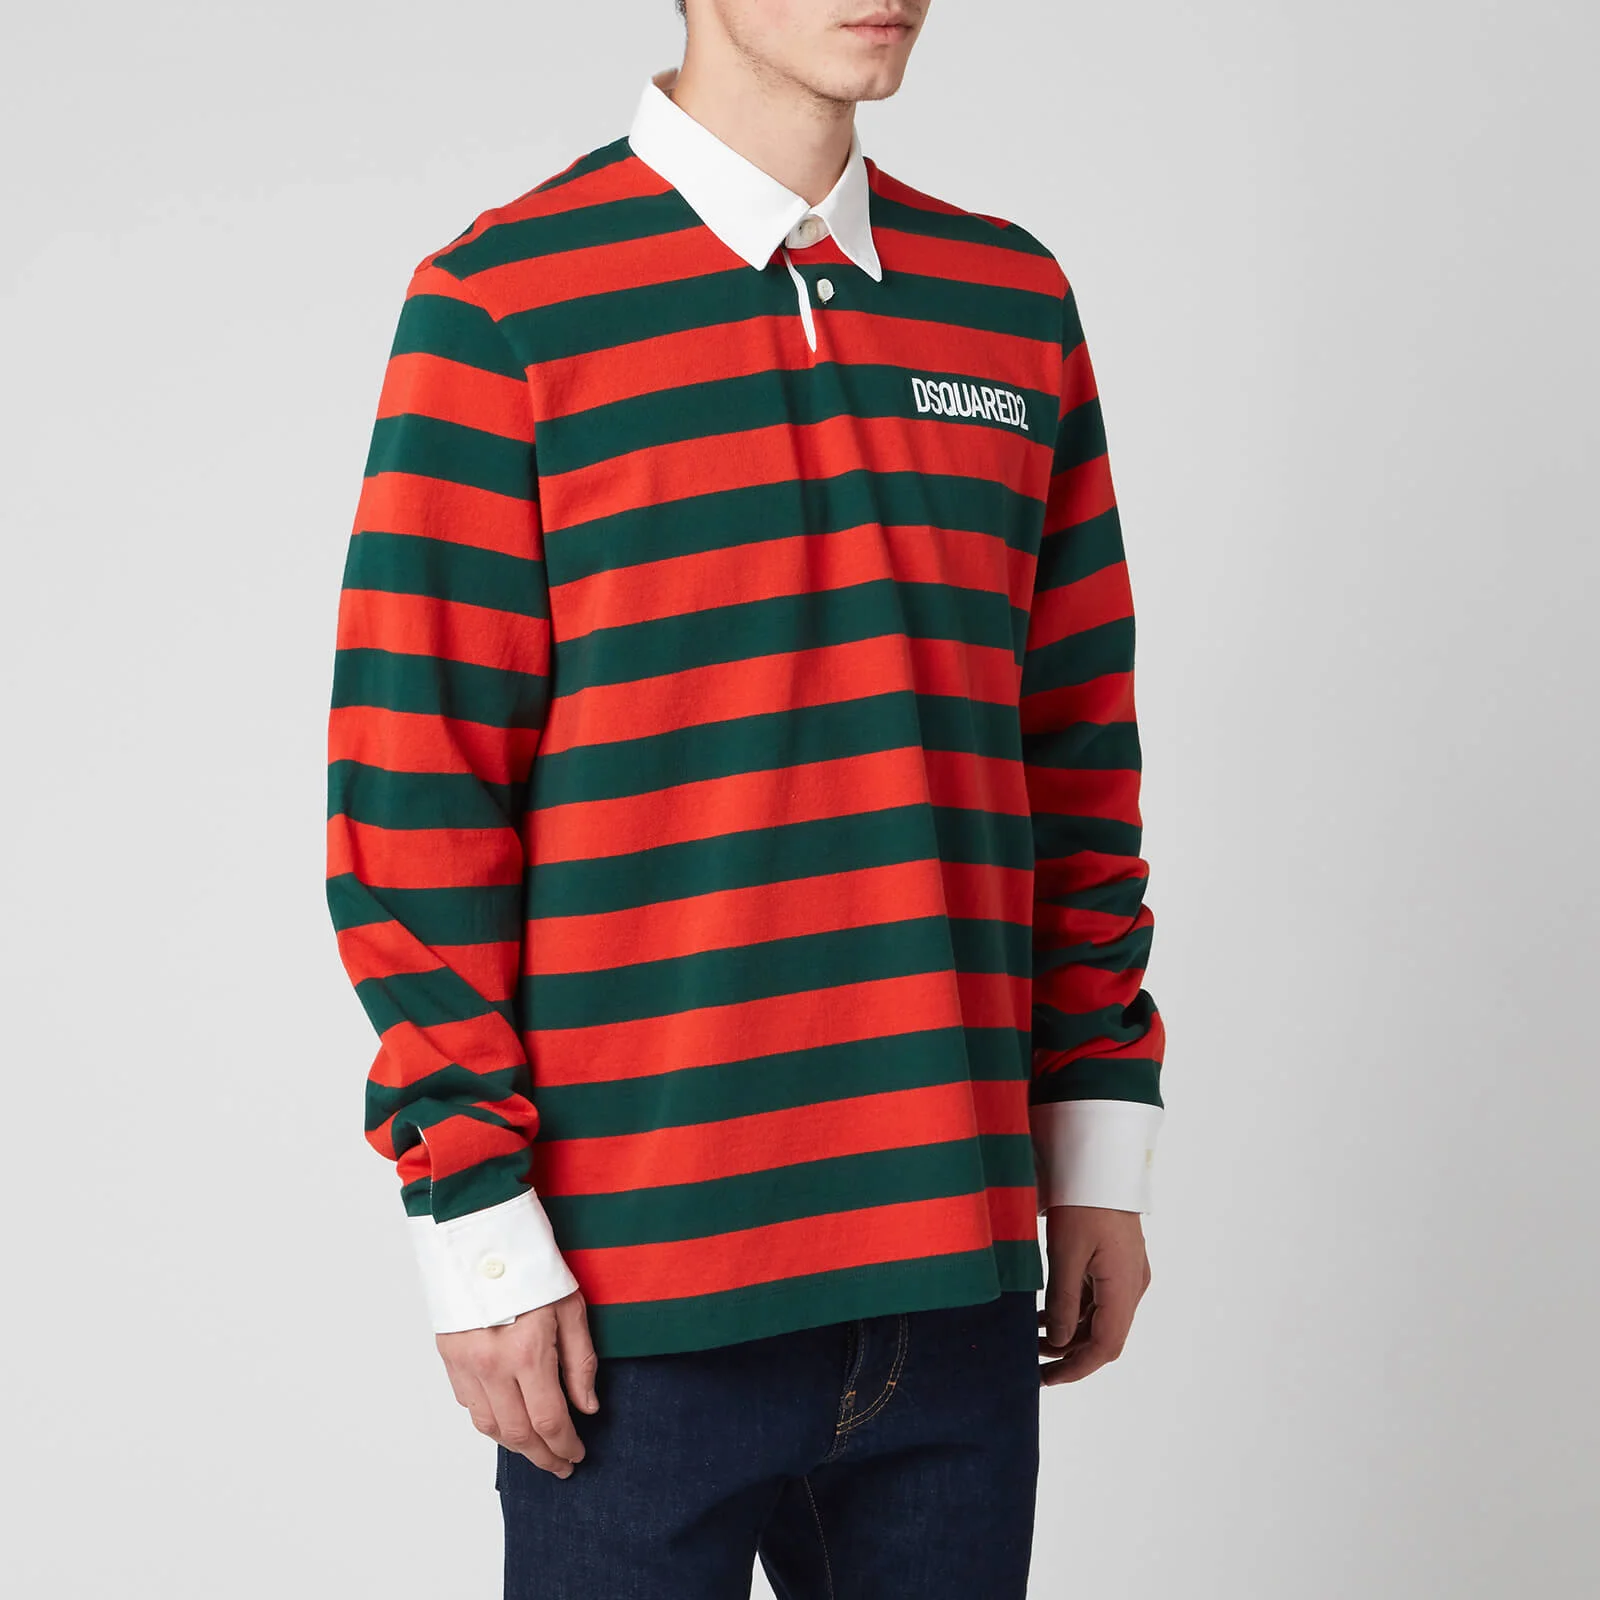 Dsquared2 Men's Slouch Fit Striped Rugby Shirt - Orange/Green Image 1